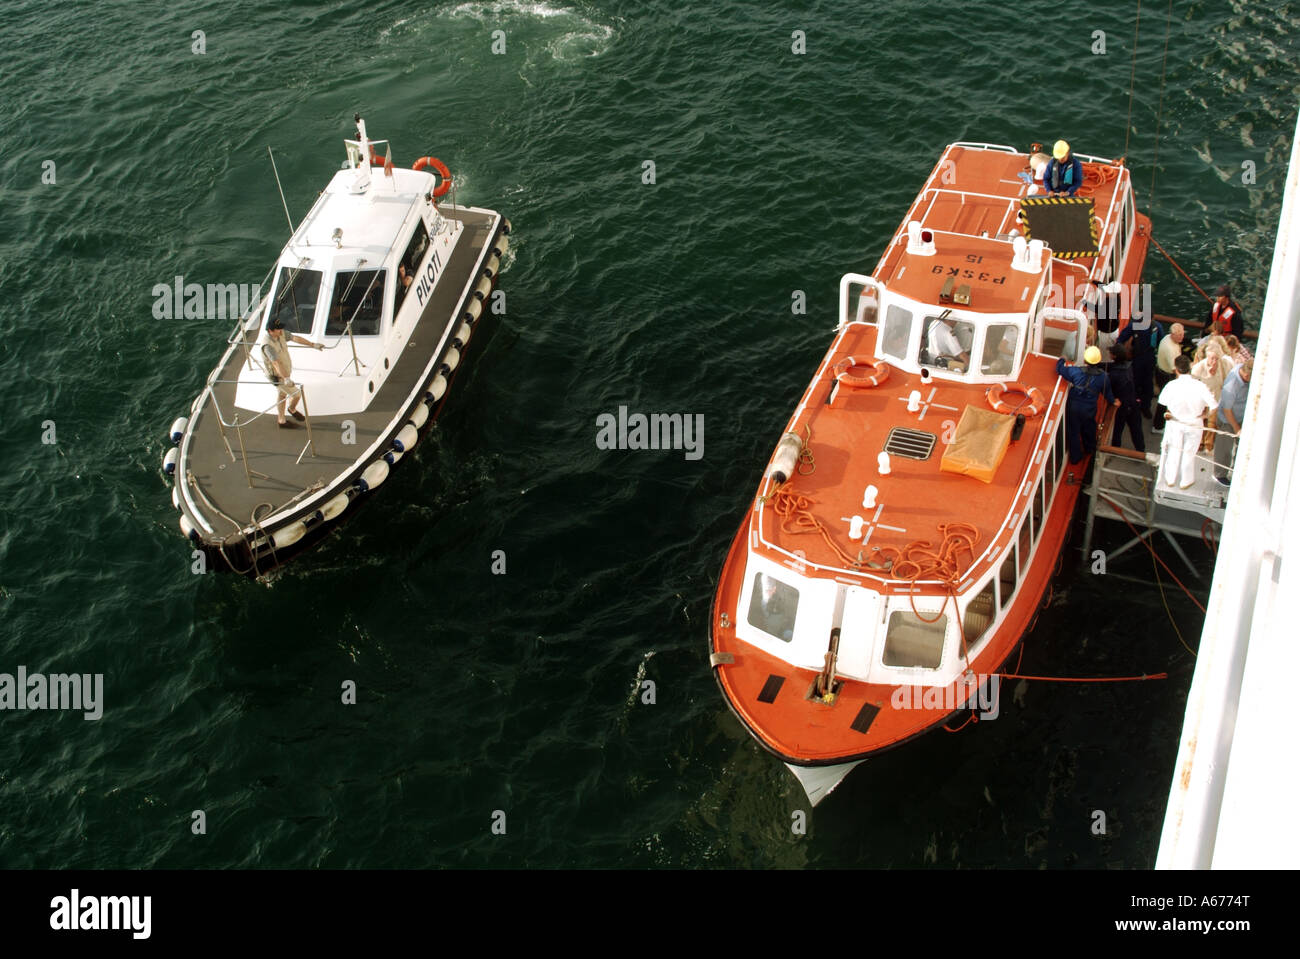 Crew supervise unloading passengers off tender lifeboat onto cruise ship Pilot launch waits to deliver Pilot Stock Photo